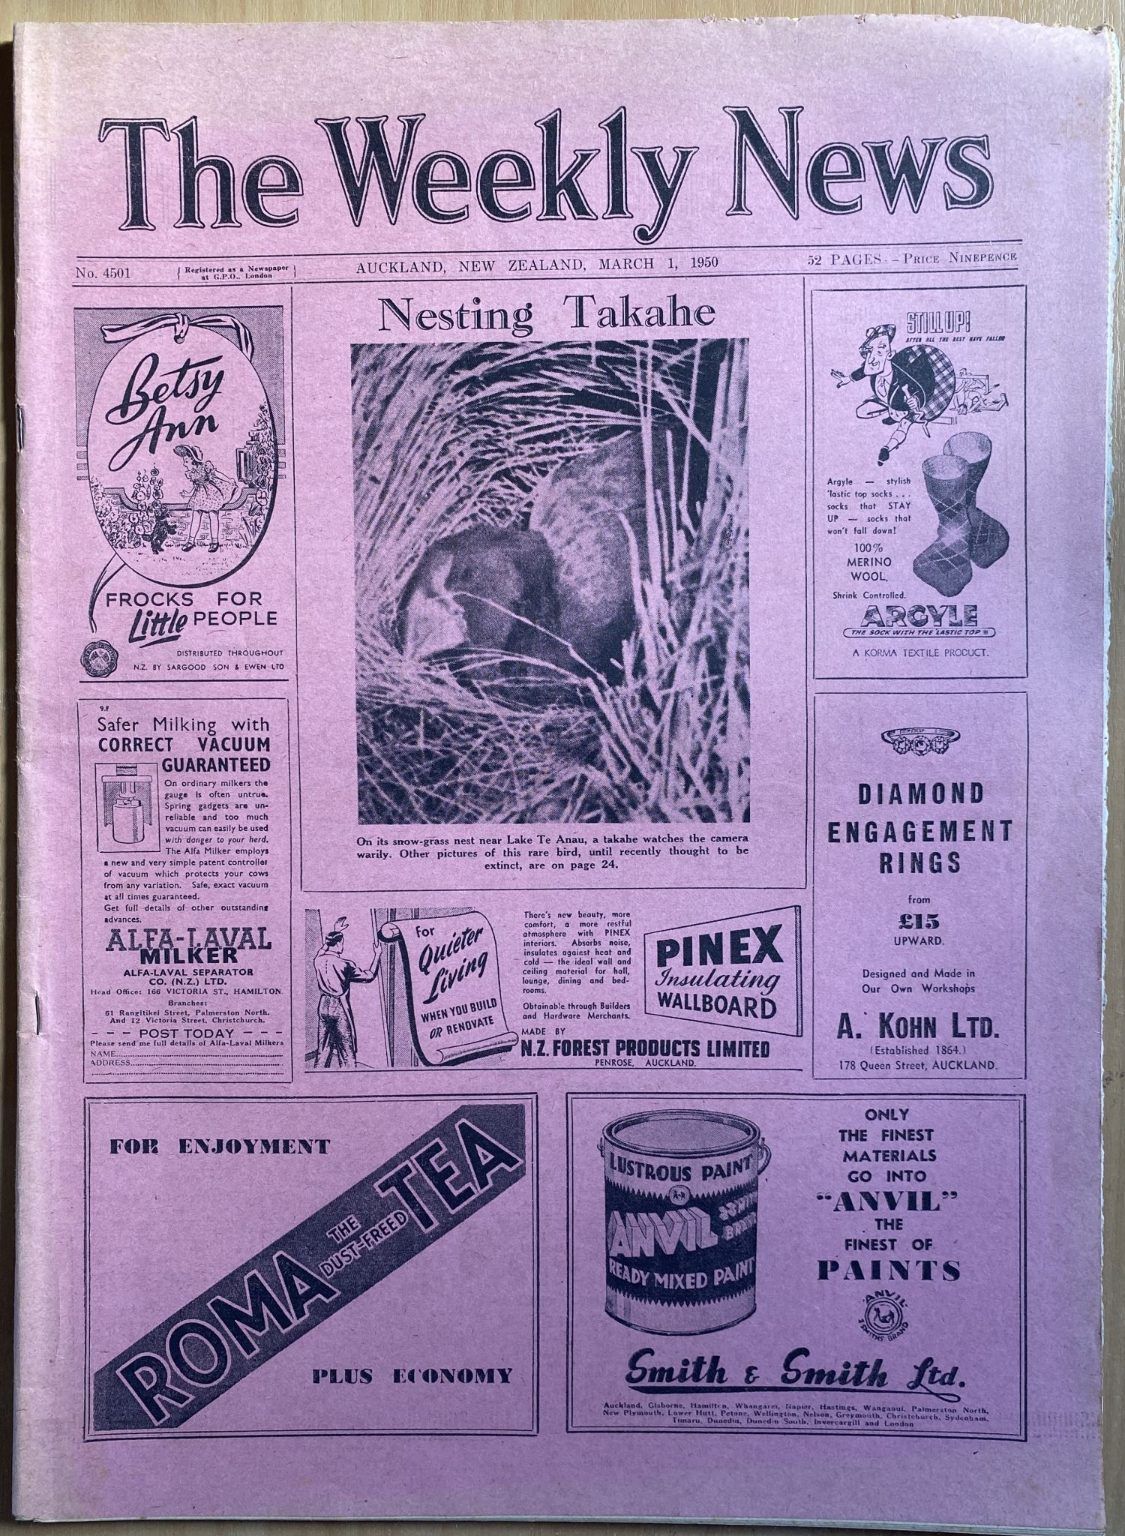 OLD NEWSPAPER: The Weekly News, No. 4501, 1 March 1950